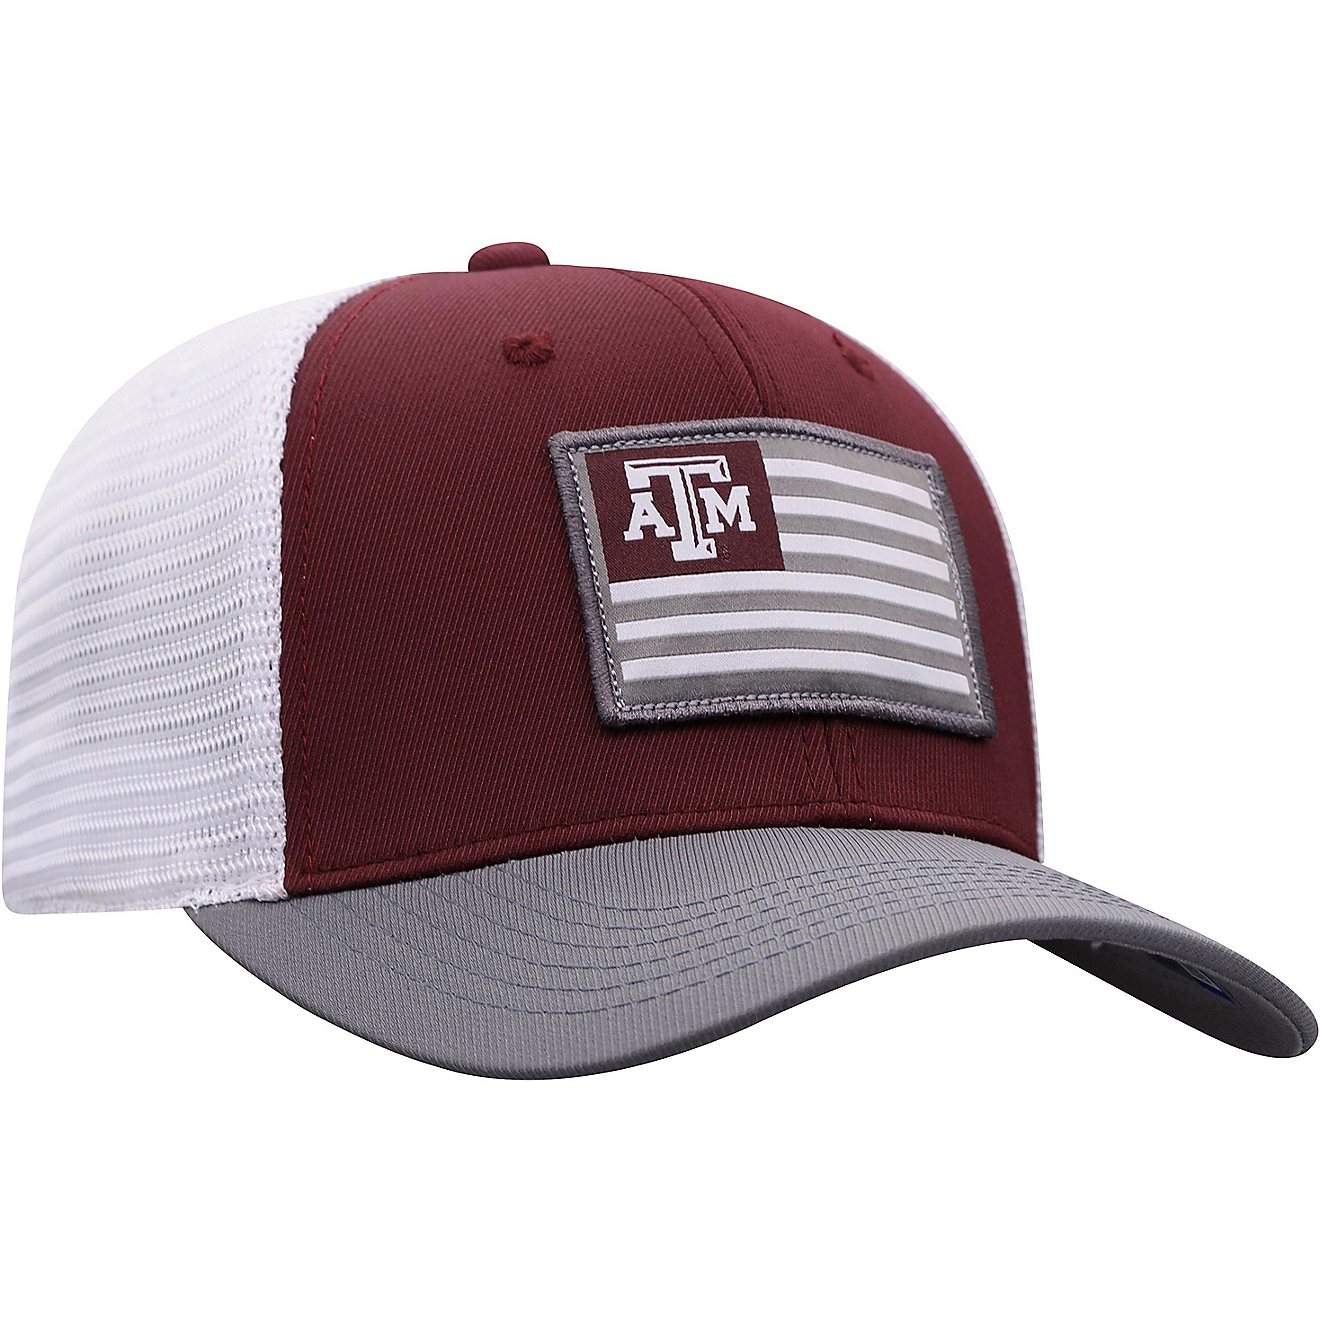 Top of the World Texas A&M University Pedigree 1 Fit Cap                                                                         - view number 4